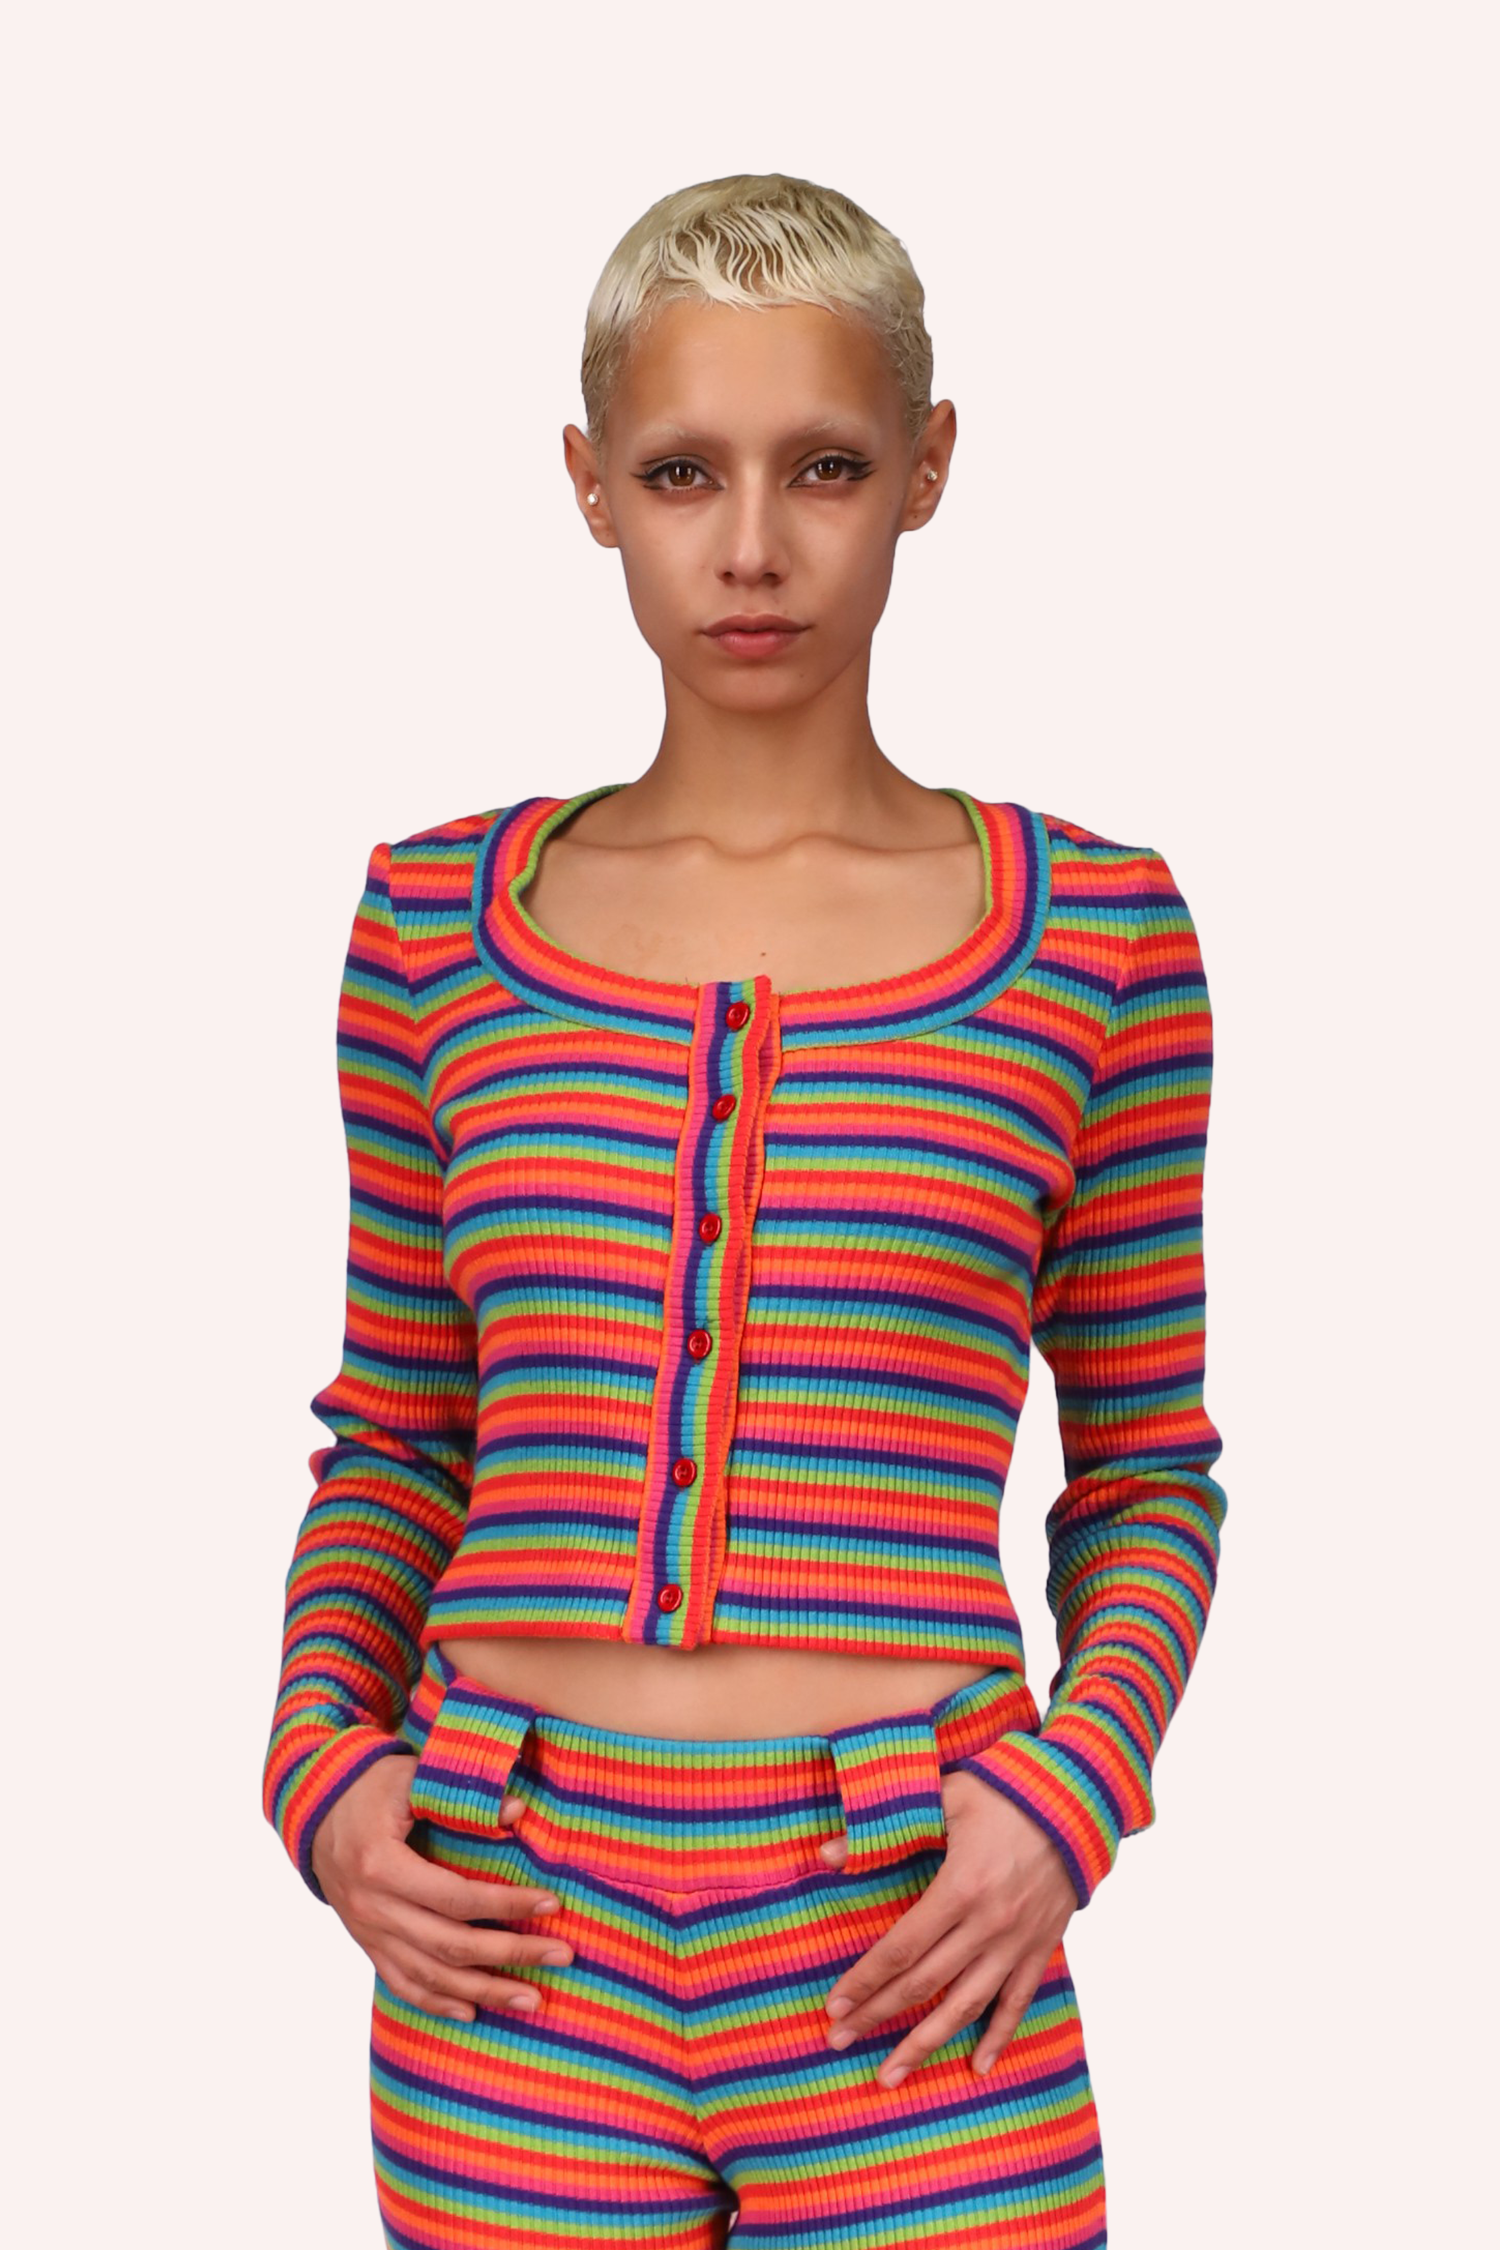 Rainbow Stripe Sweater, long sleeves, large round collar cut, 6-red button to close it